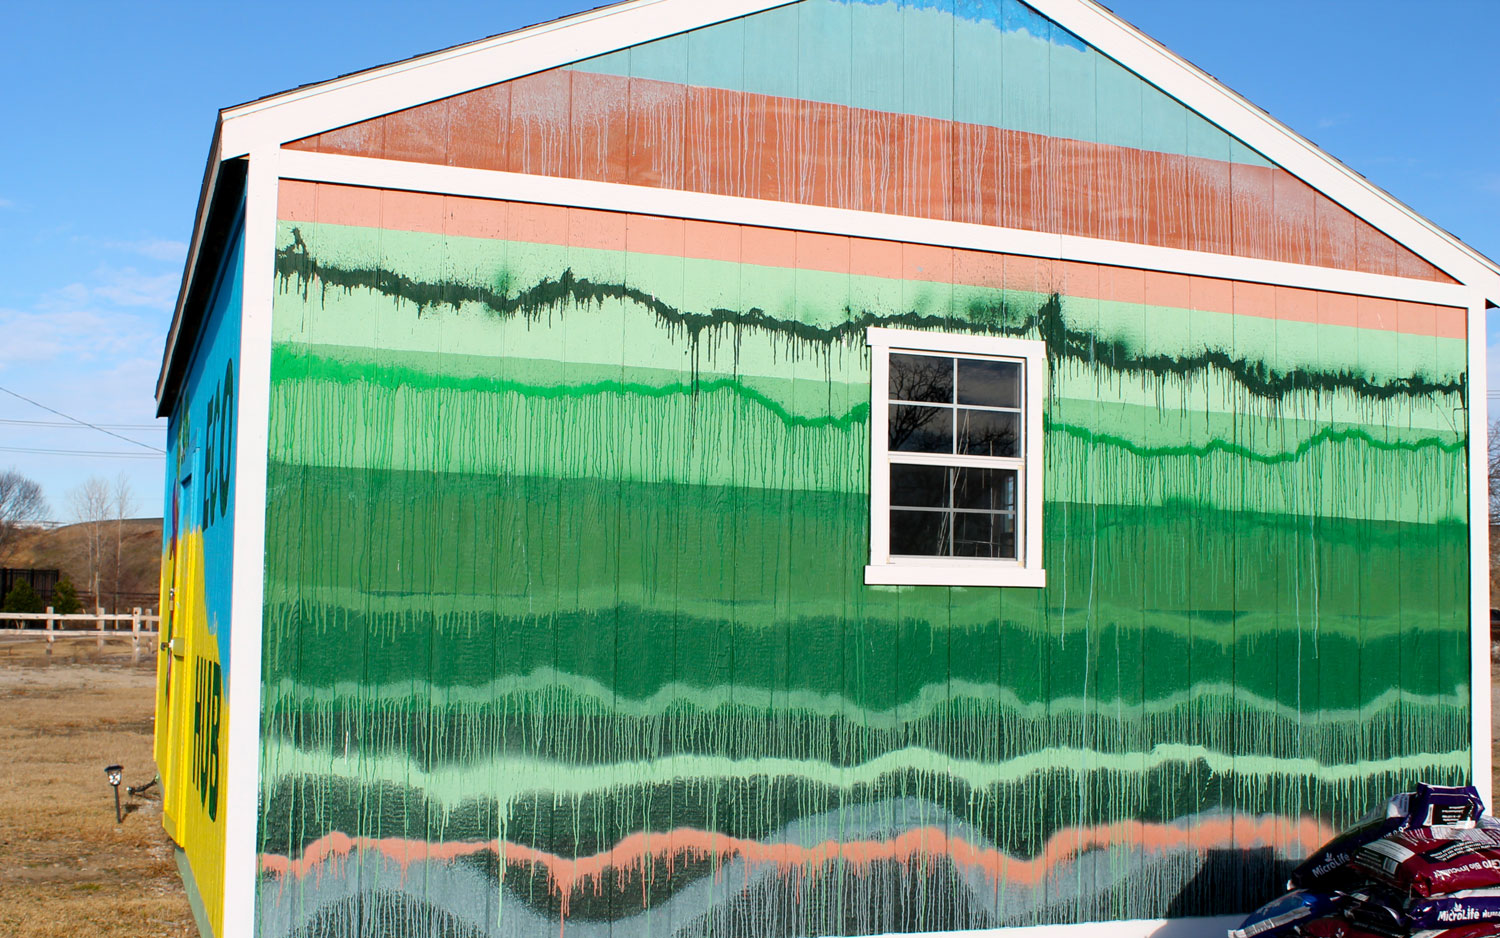 The side of a single-story gabled-roof building, painted in wide horizontal stripes overlapped by jagged dripping sprayed-on lines, in shades of green, blue, and terra cotta.